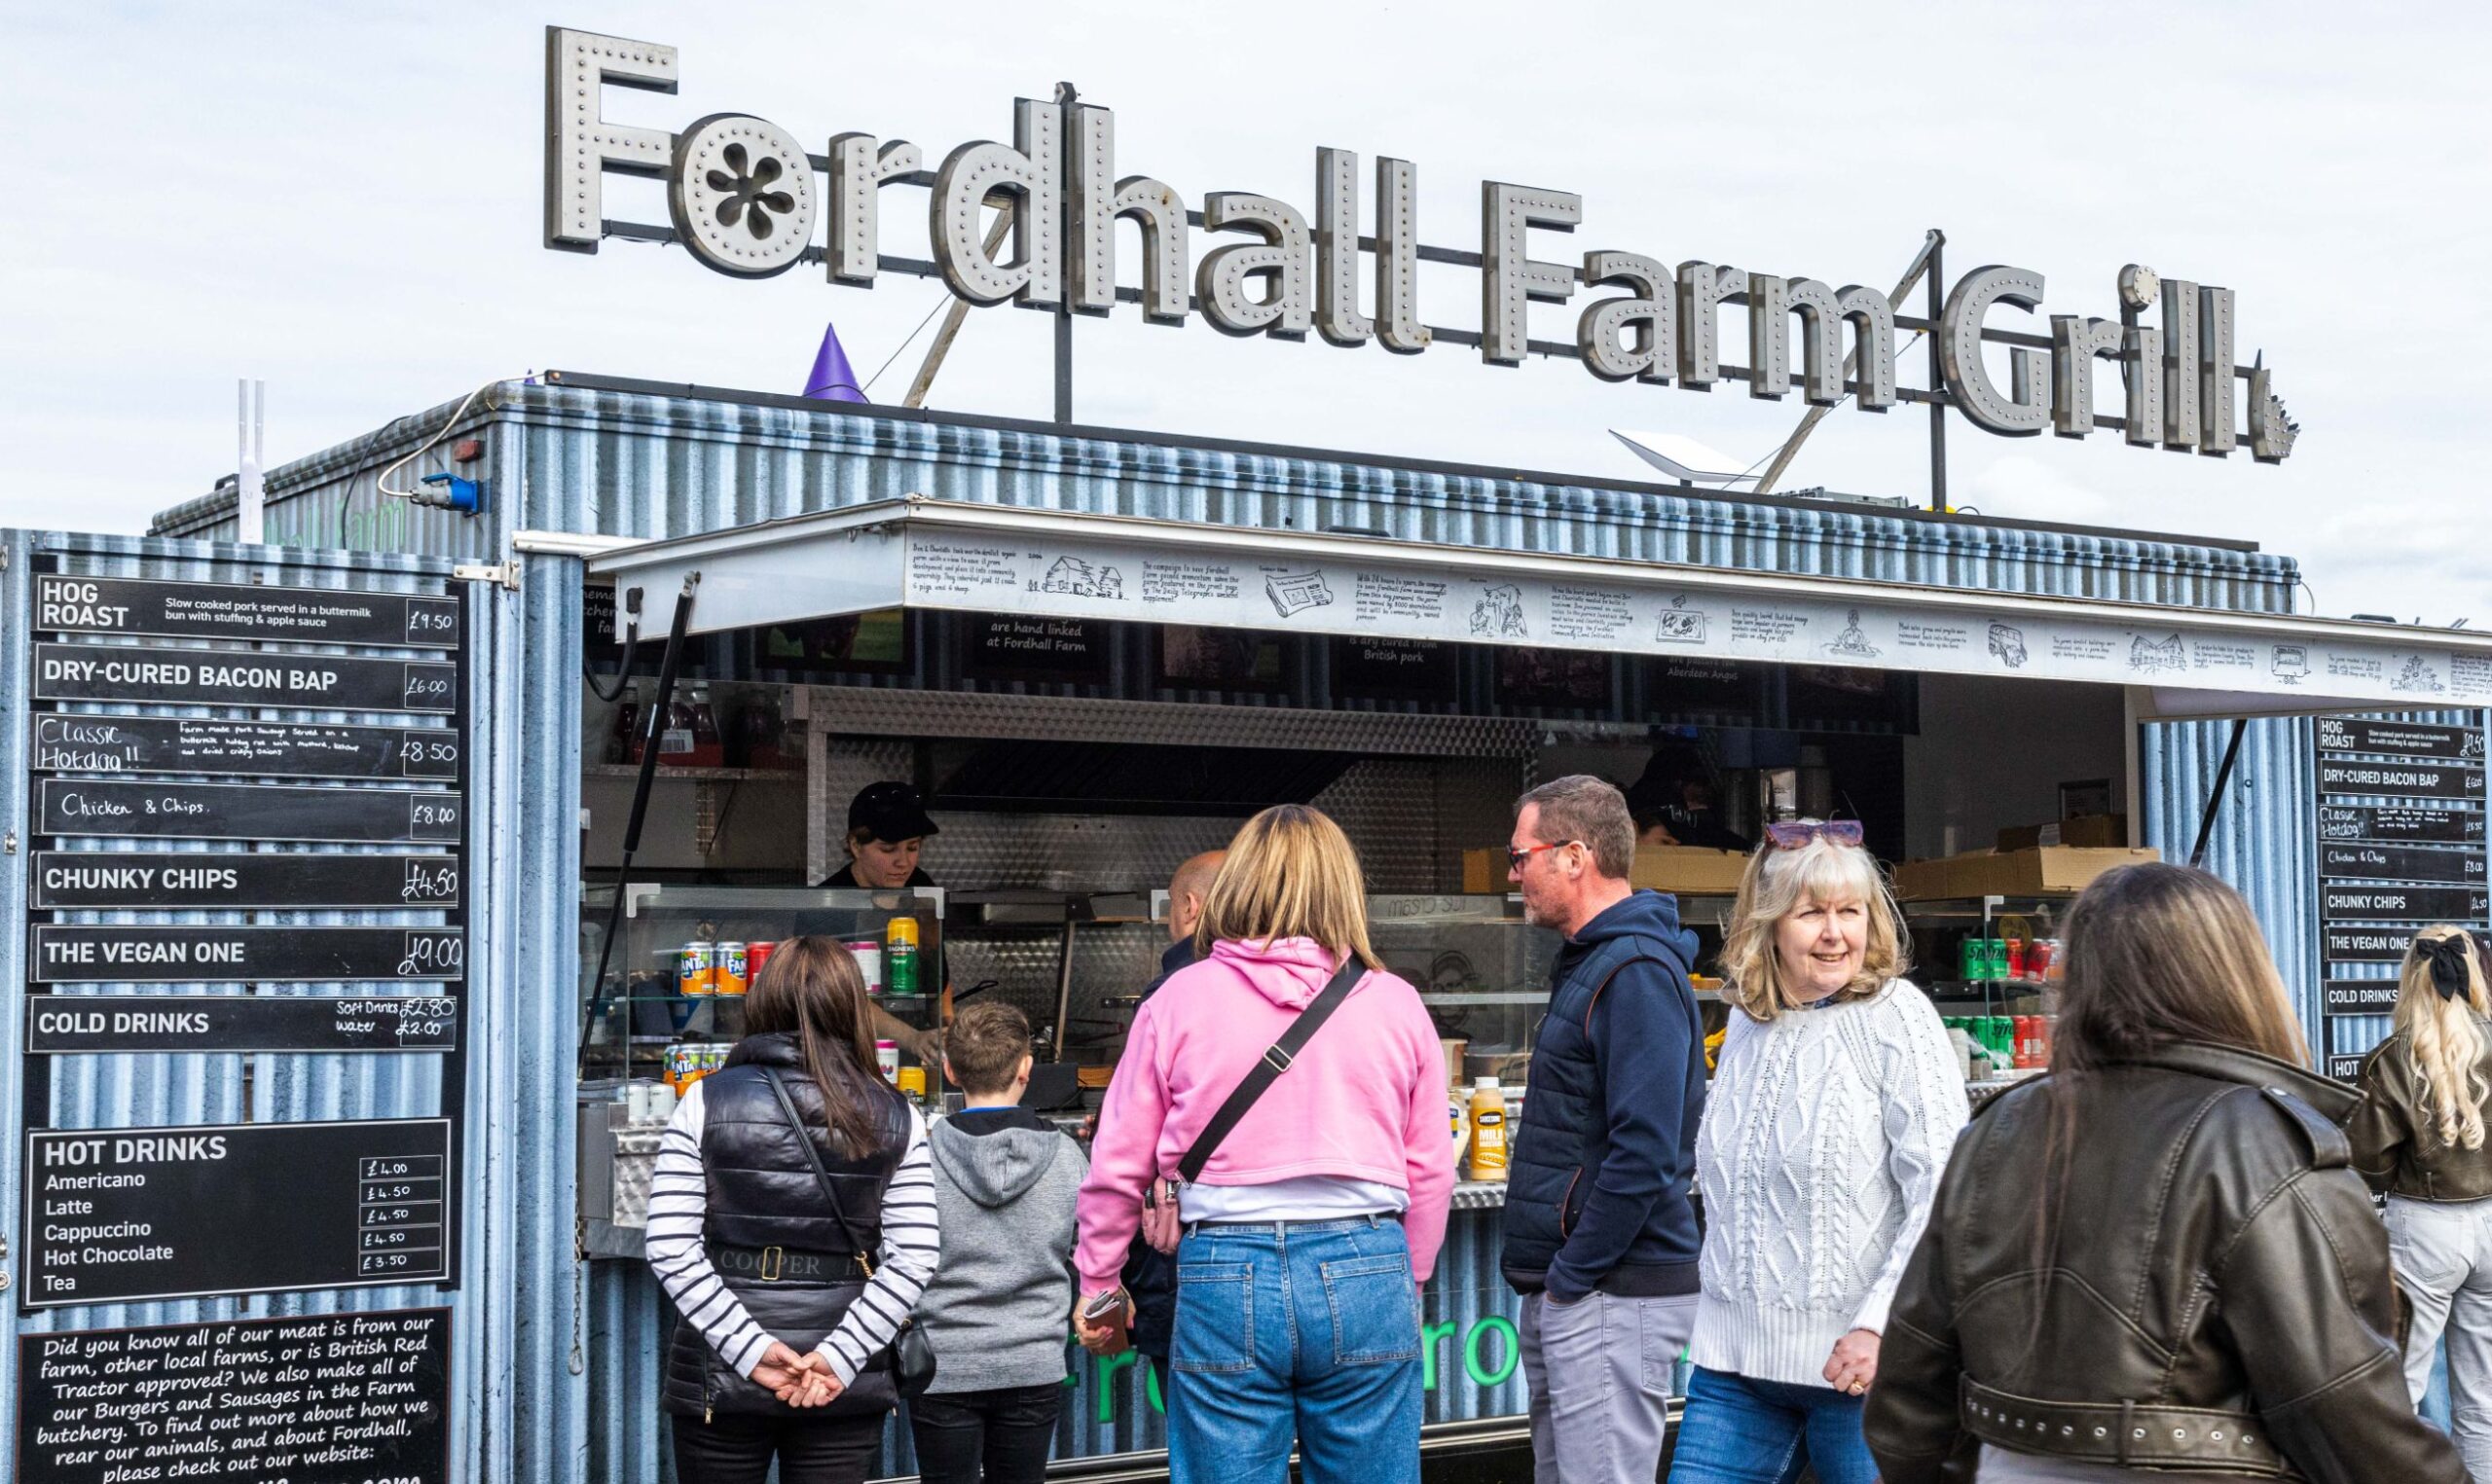 Fordhall Farm Events become new Concession Partner thumbnail image